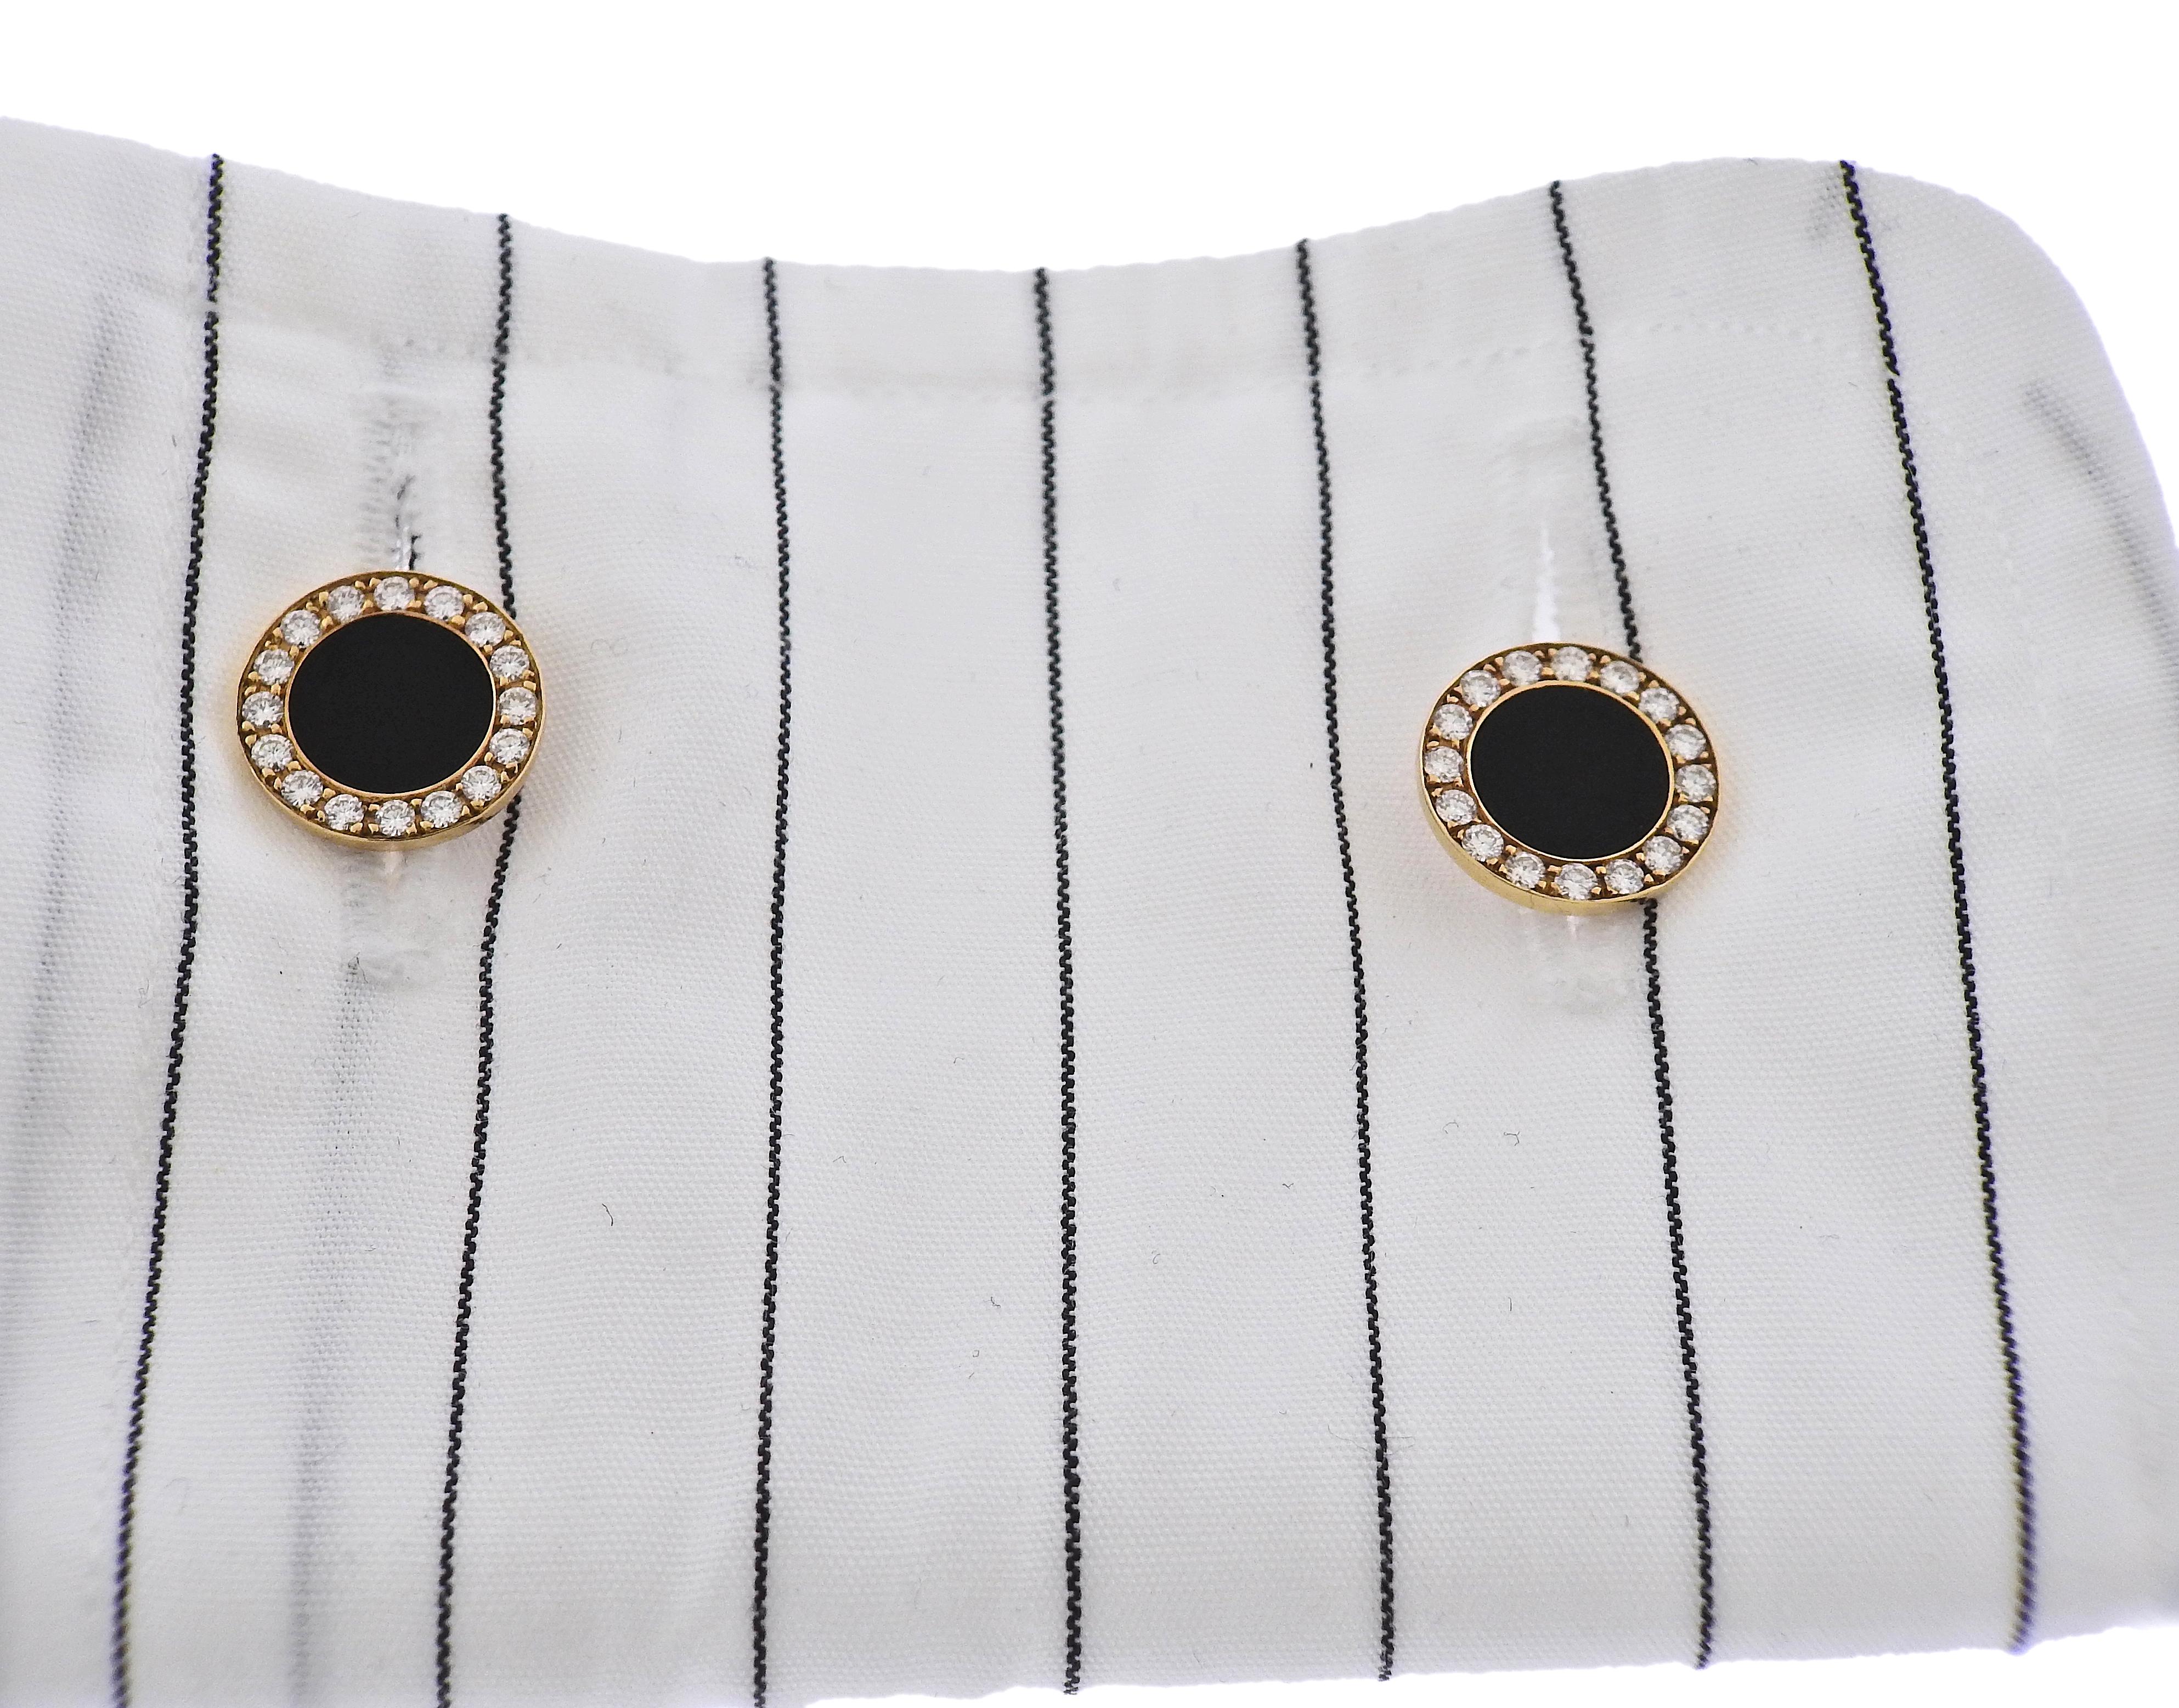 Bulgari Onyx Diamond Gold Cufflinks In Excellent Condition For Sale In New York, NY